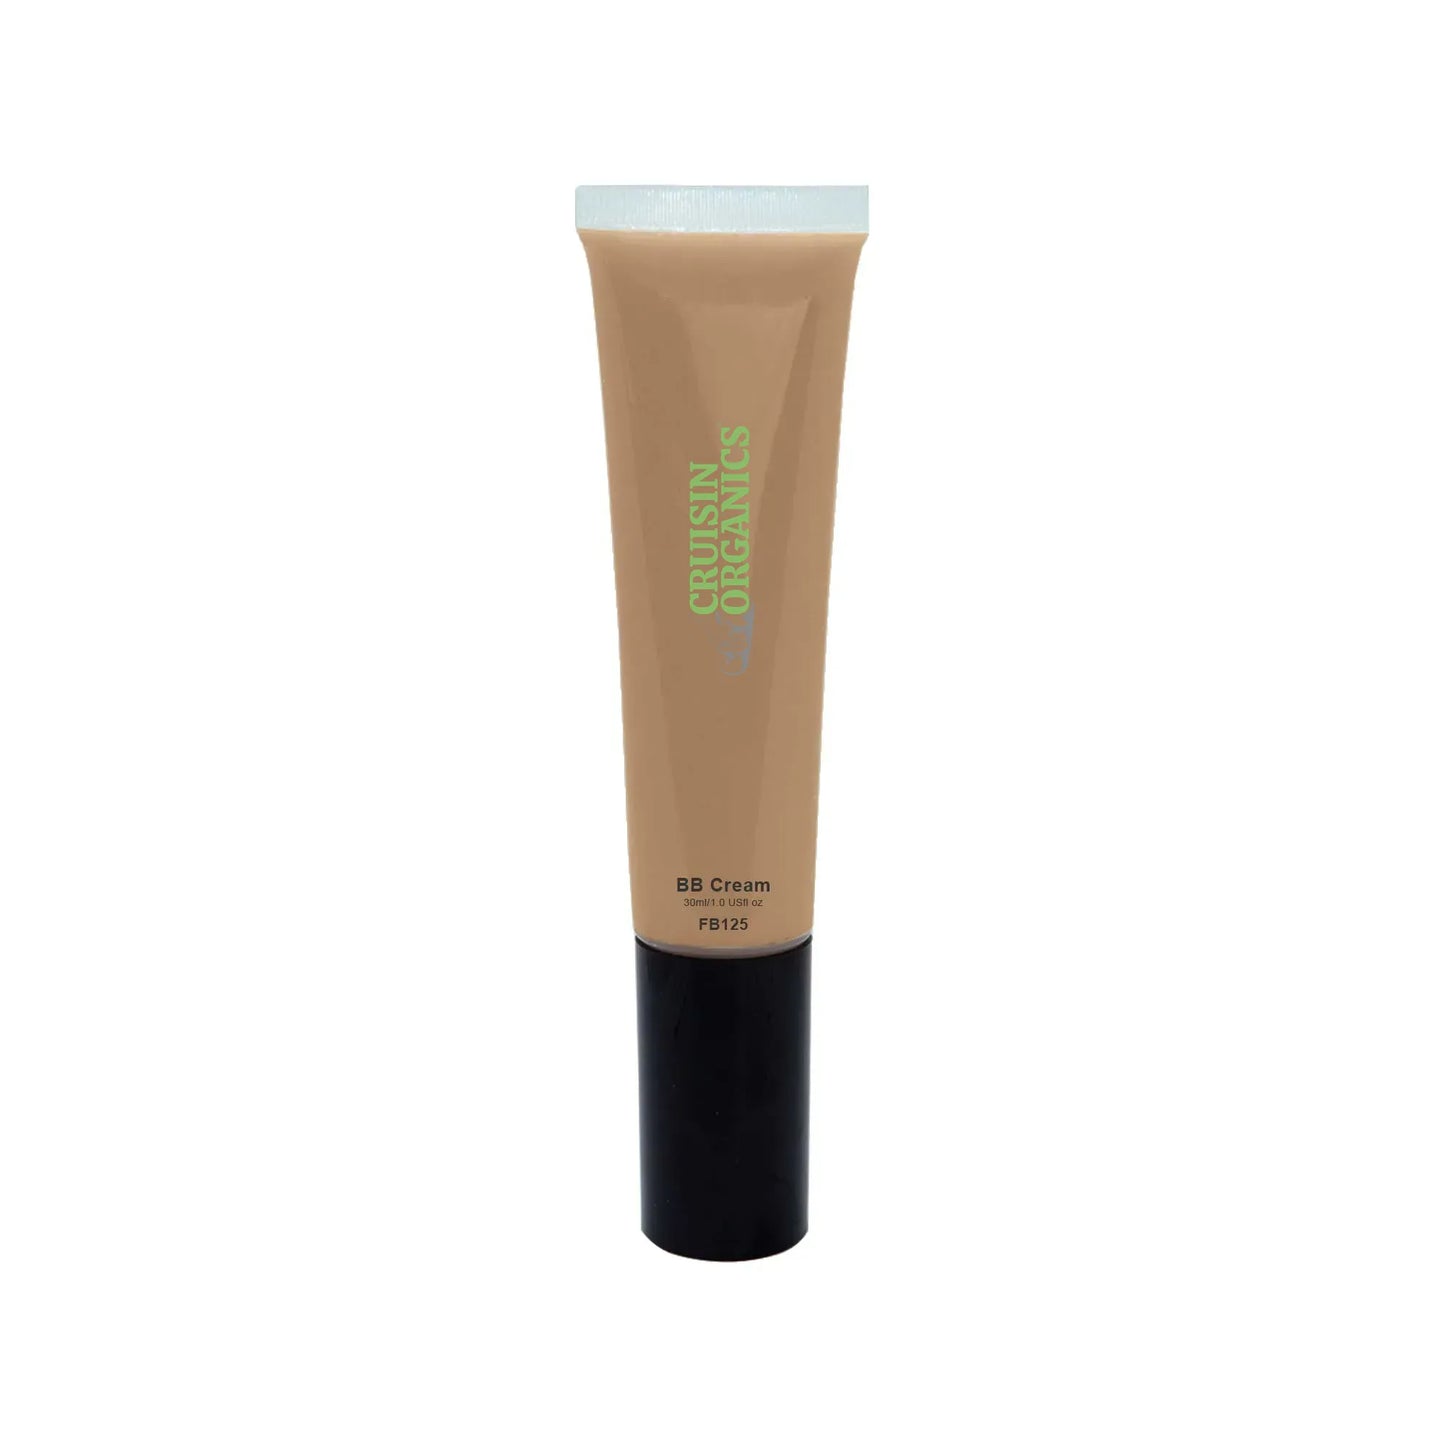 Your skin protection and medium coverage in one bottle. Cruisin Organics Beachy BB Cream, with SPF. A light, moisturizing formula with SPF 18 and nourishing ingredients to help rejuvenate the skin, this multifunctional product incorporates your foundation, moisturizer, and sunscreen into one amazing product.